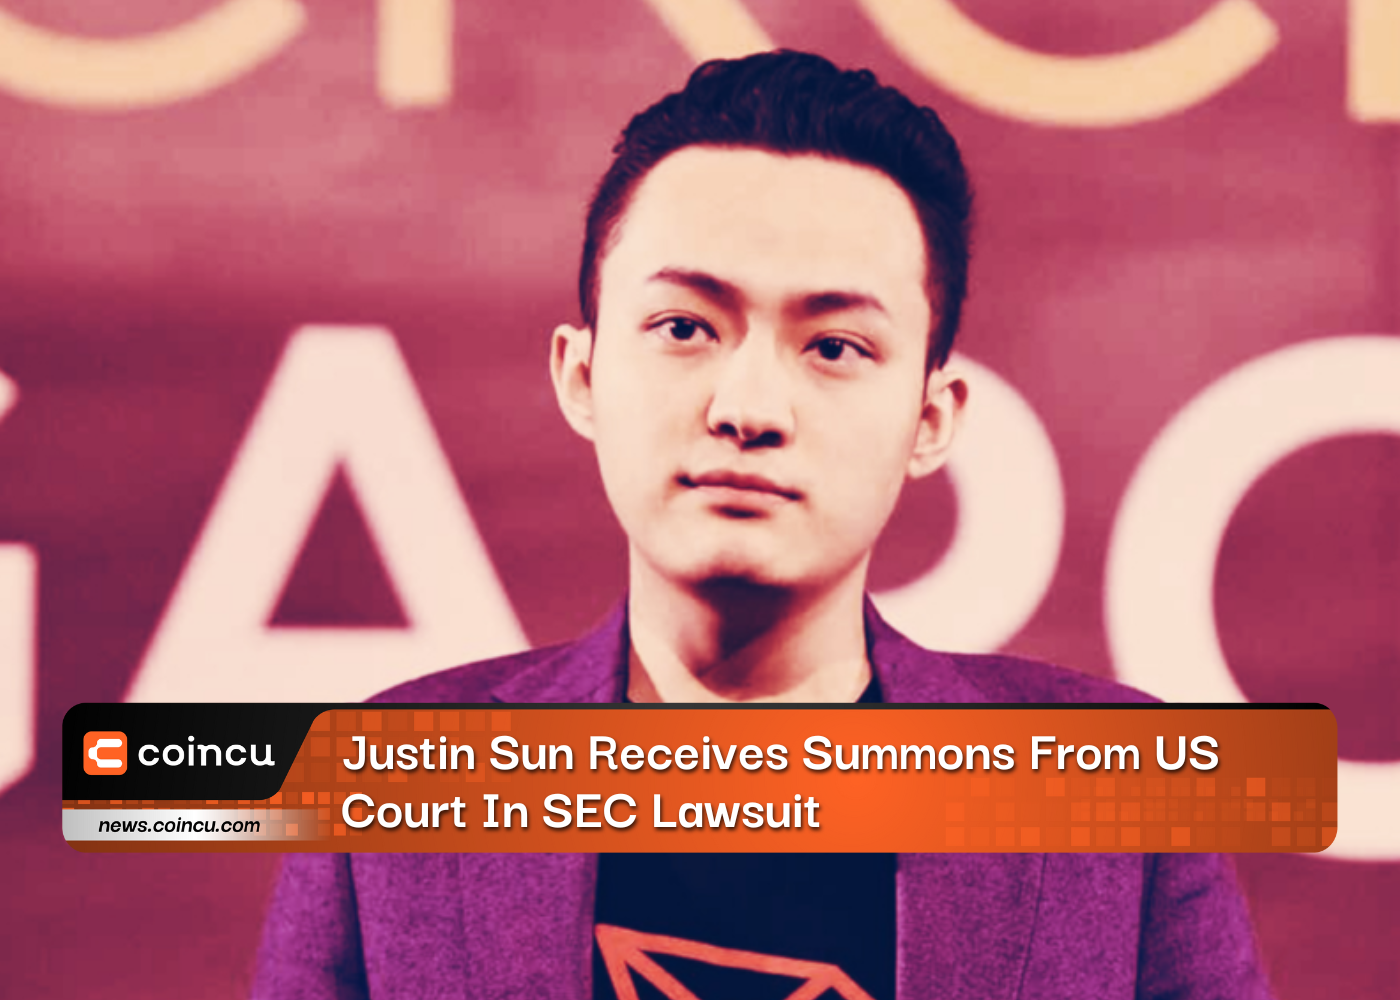 Justin Sun Receives Summons From US Court In SEC Lawsuit